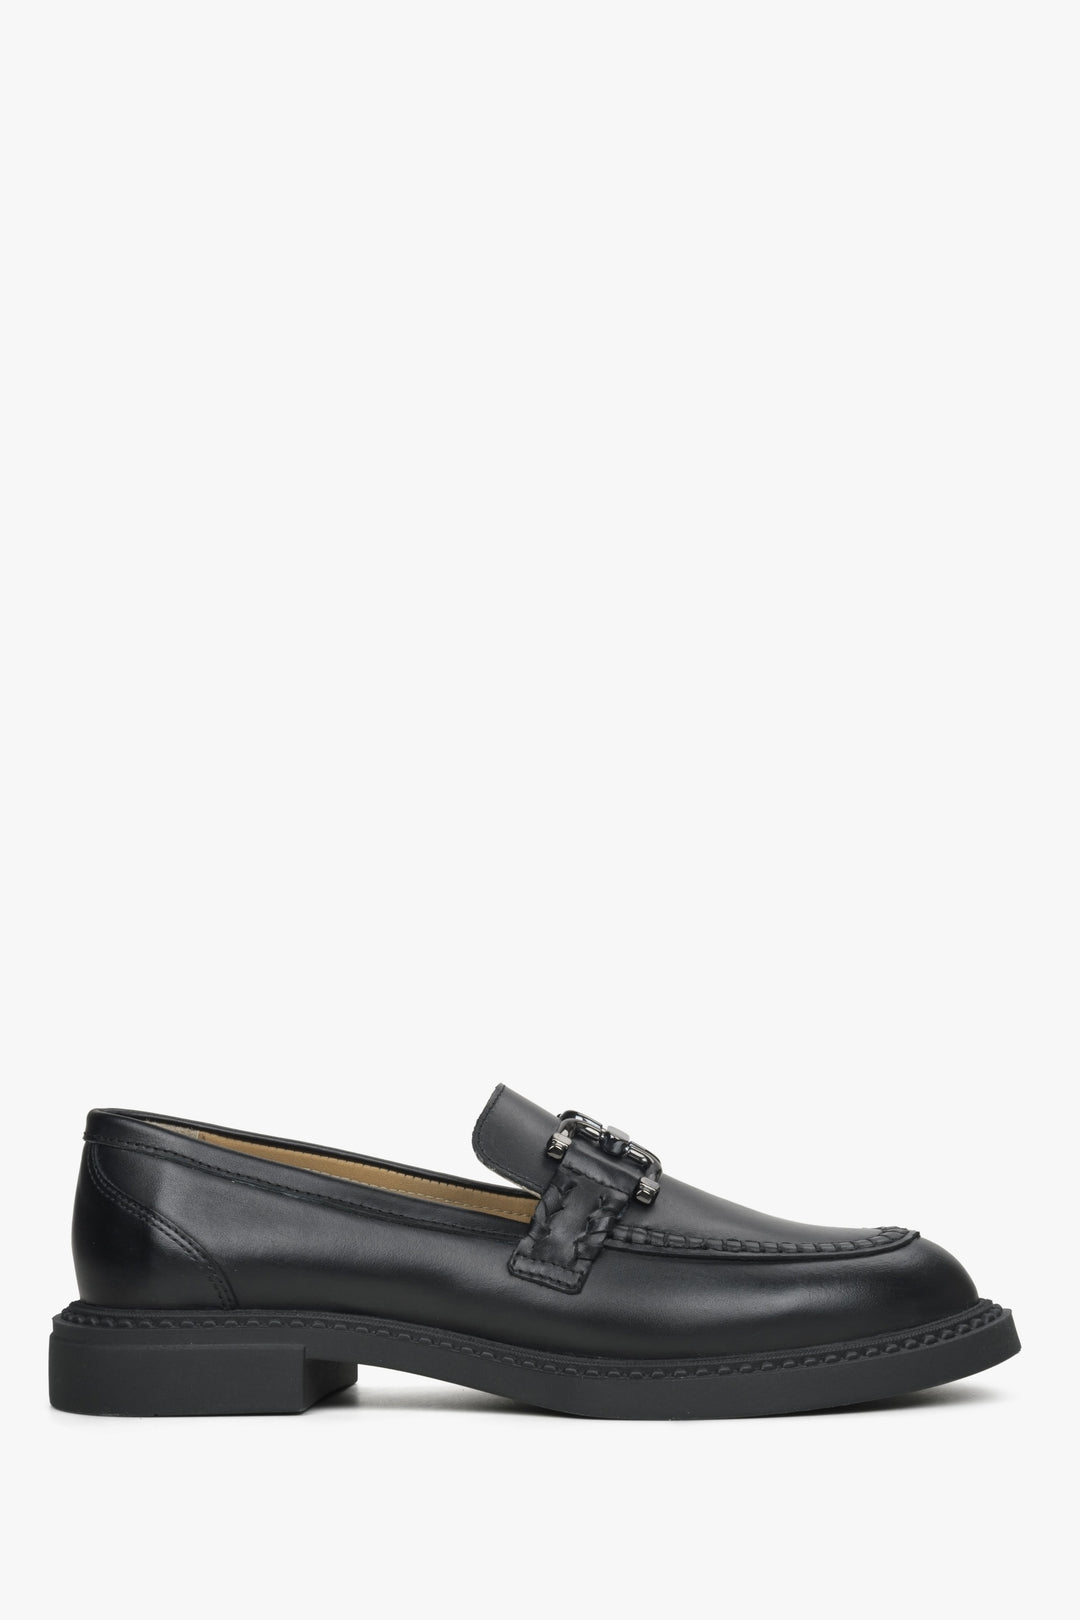 Women's Black Loafers made of Genuine Leather with a Buckle Estro ER00114528.